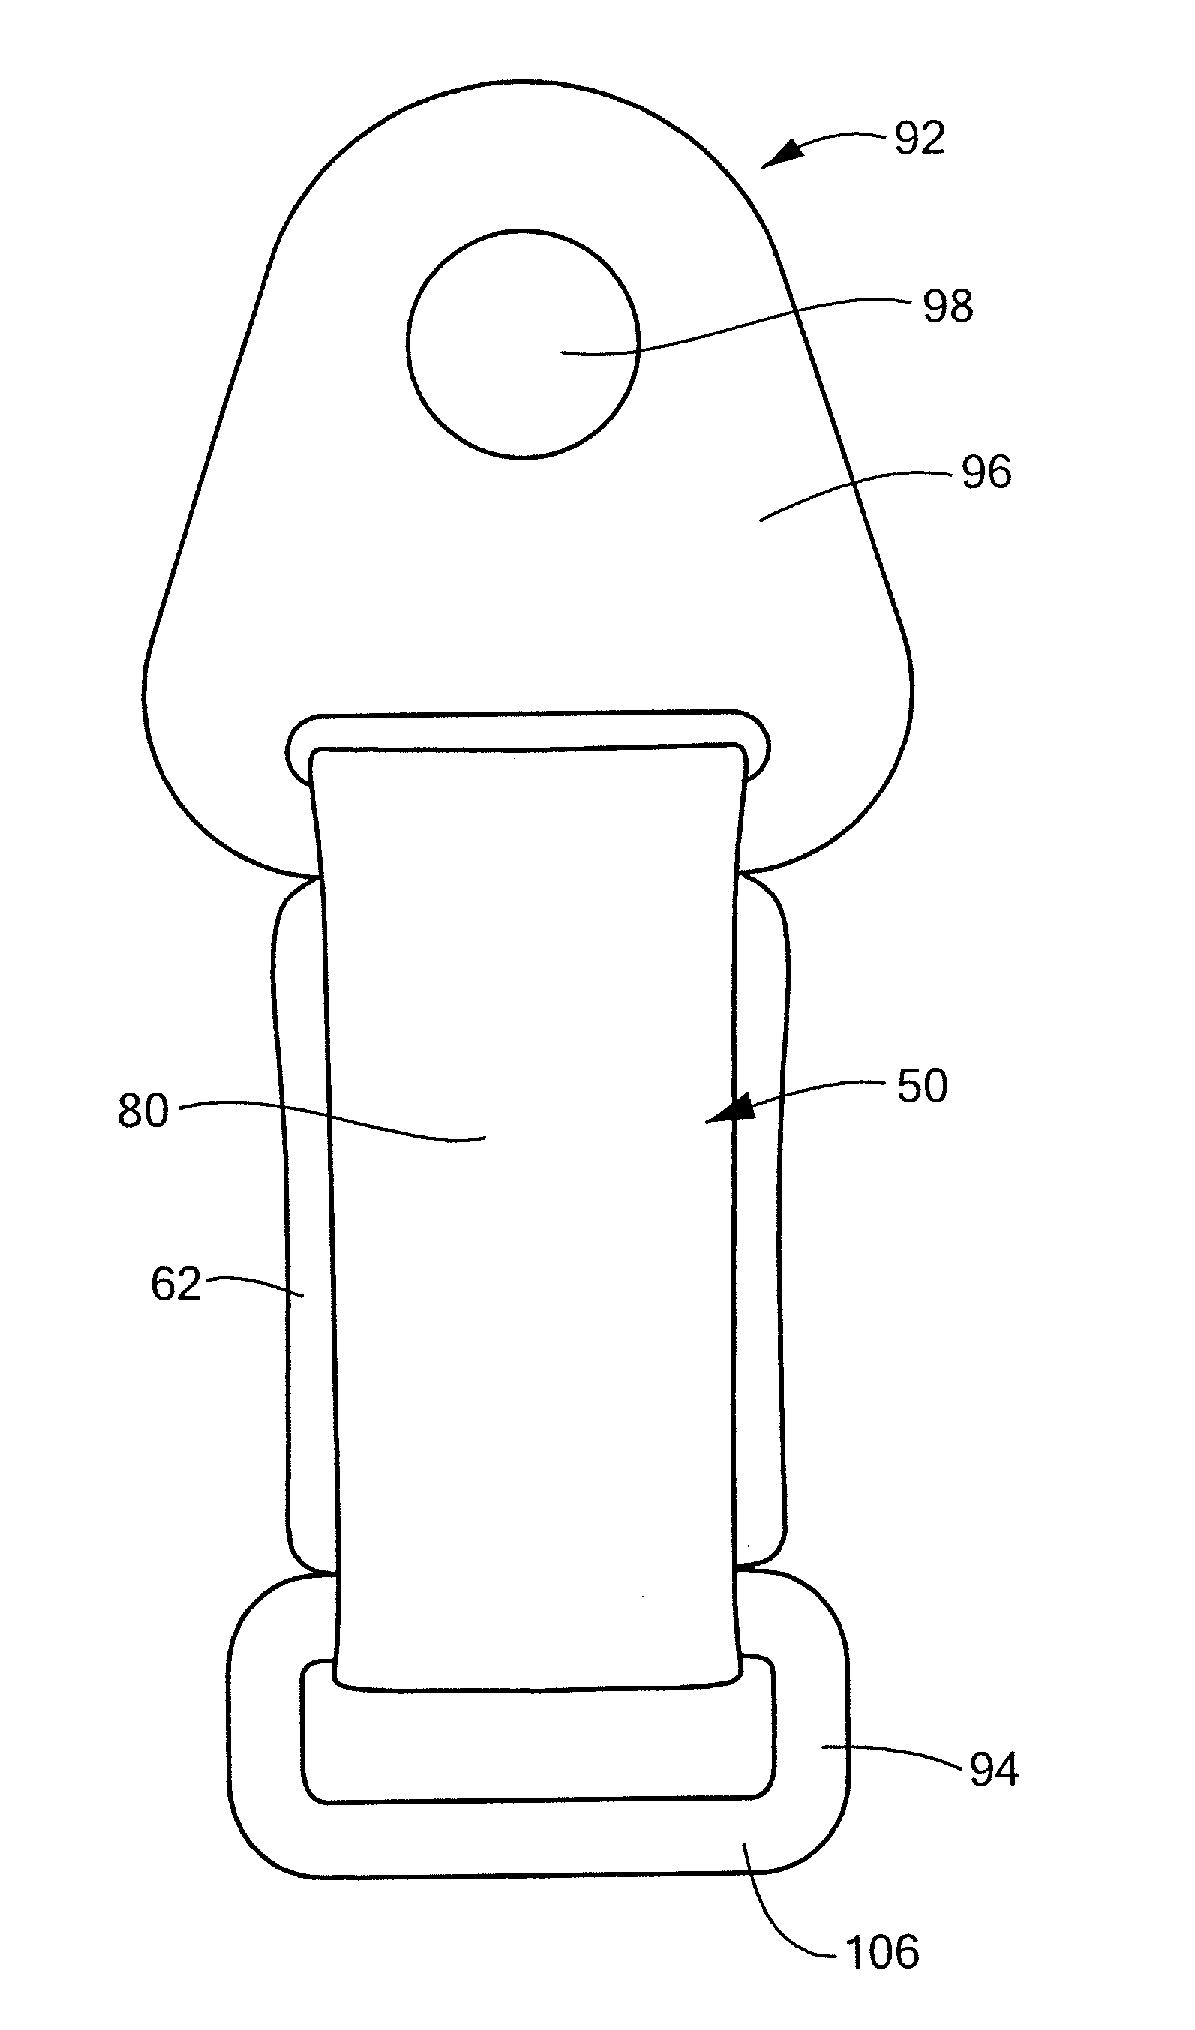 Energy absorbing system for blast mitigation of support elements such as suspended seats or stretchers in military vehicles